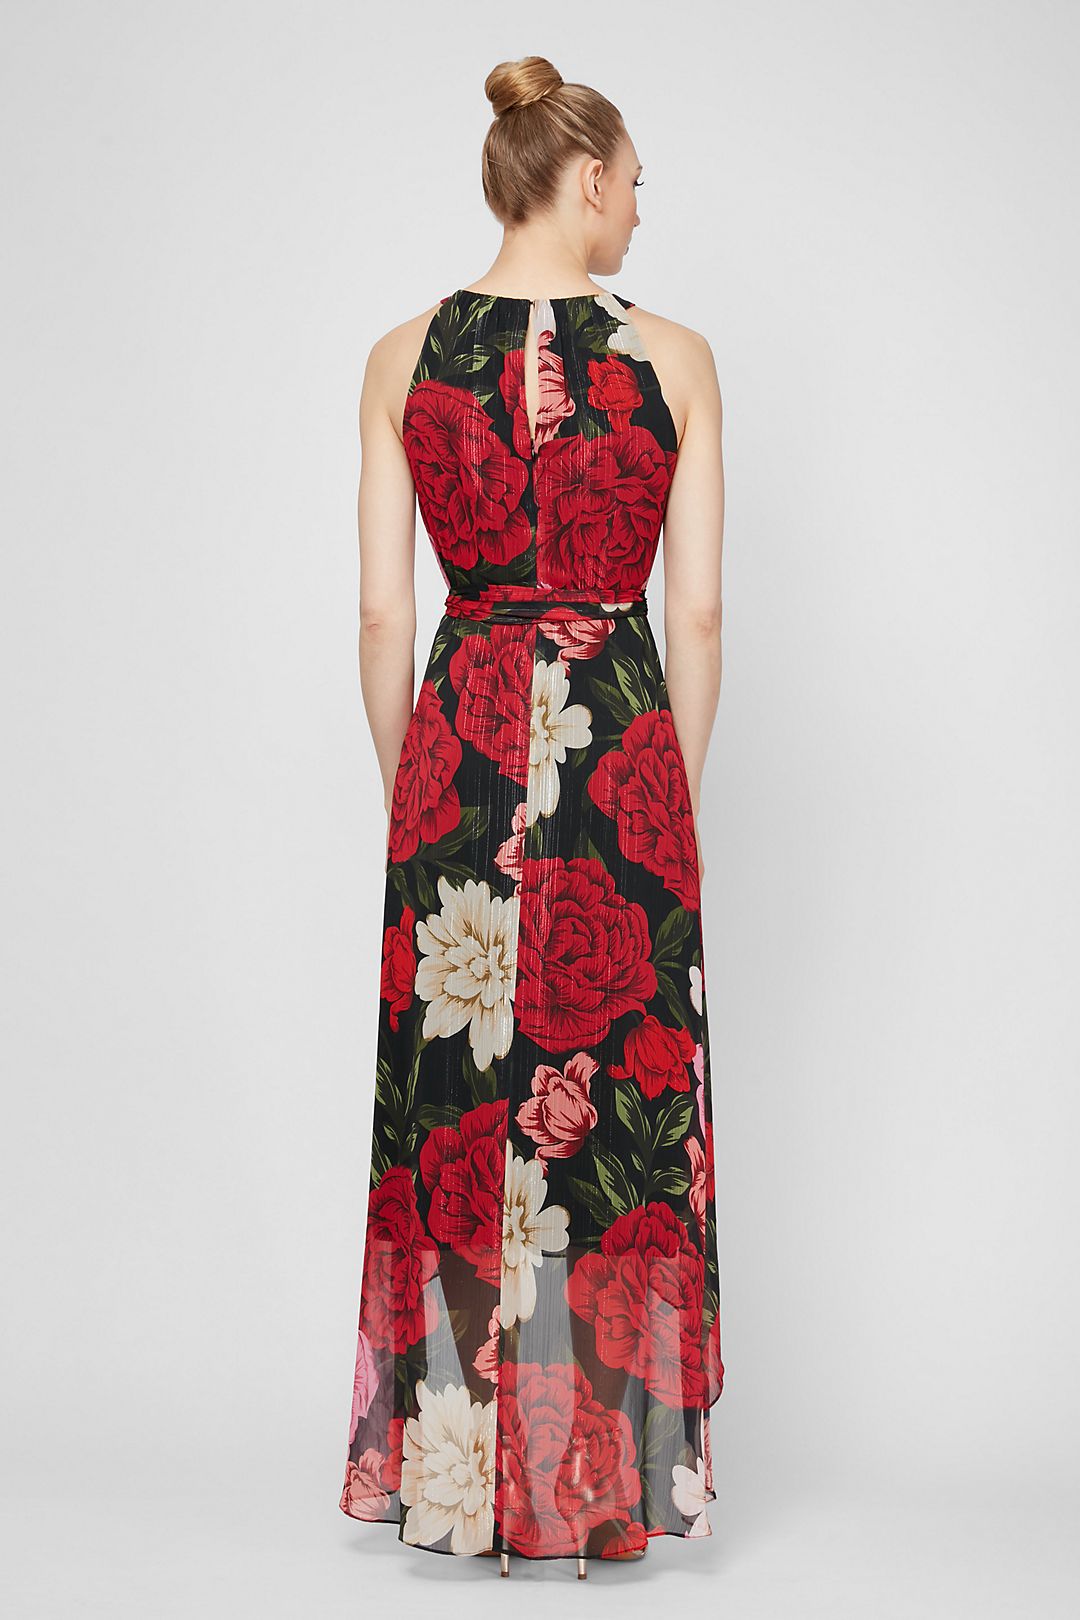 High-Low Floral Chiffon Maxi Dress with Belt Image 2